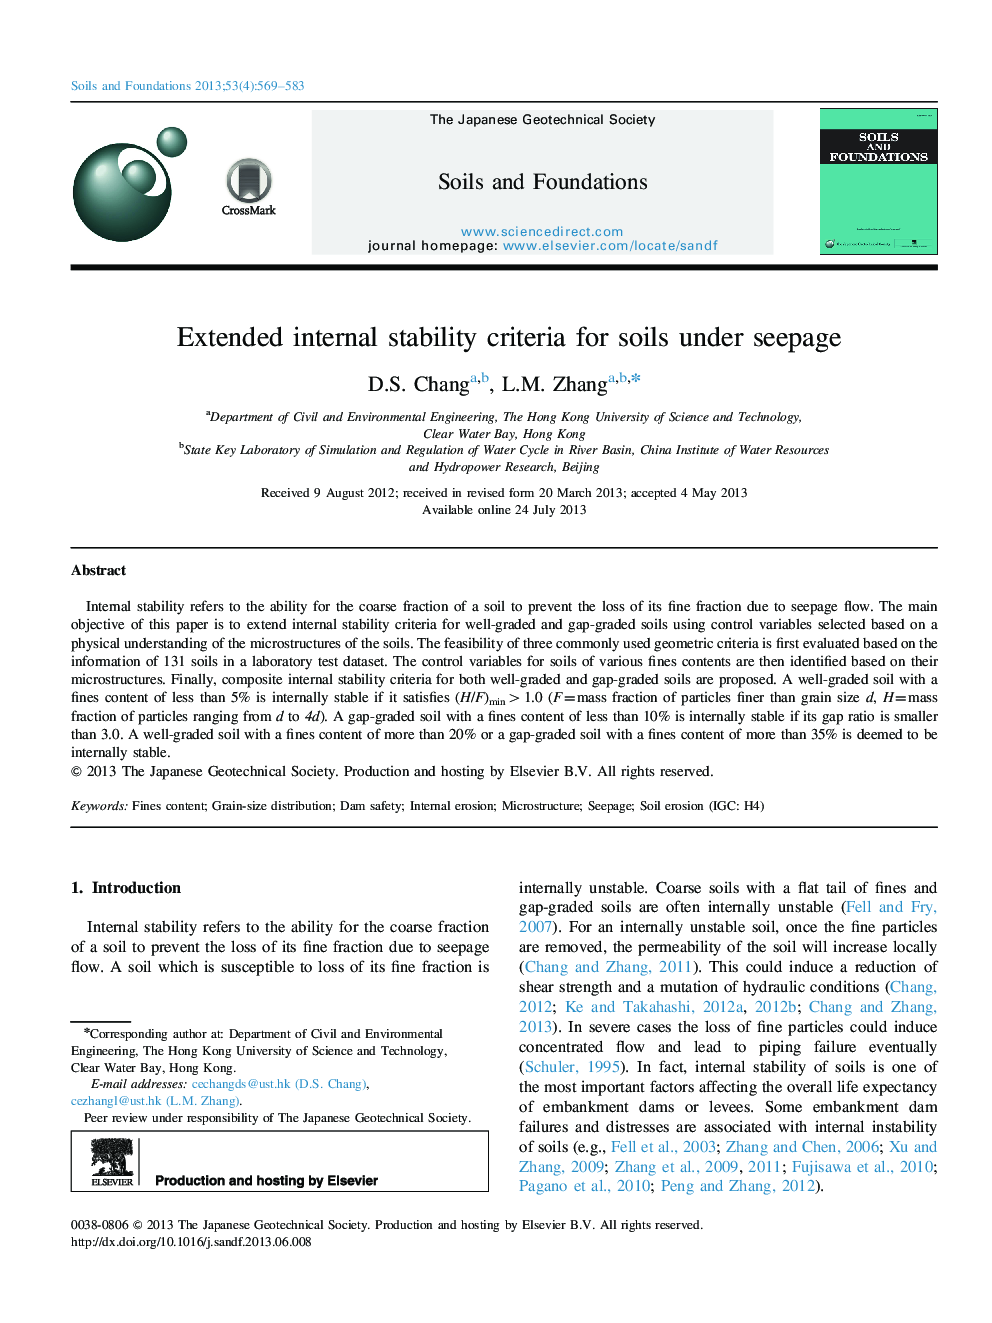 Extended internal stability criteria for soils under seepage 